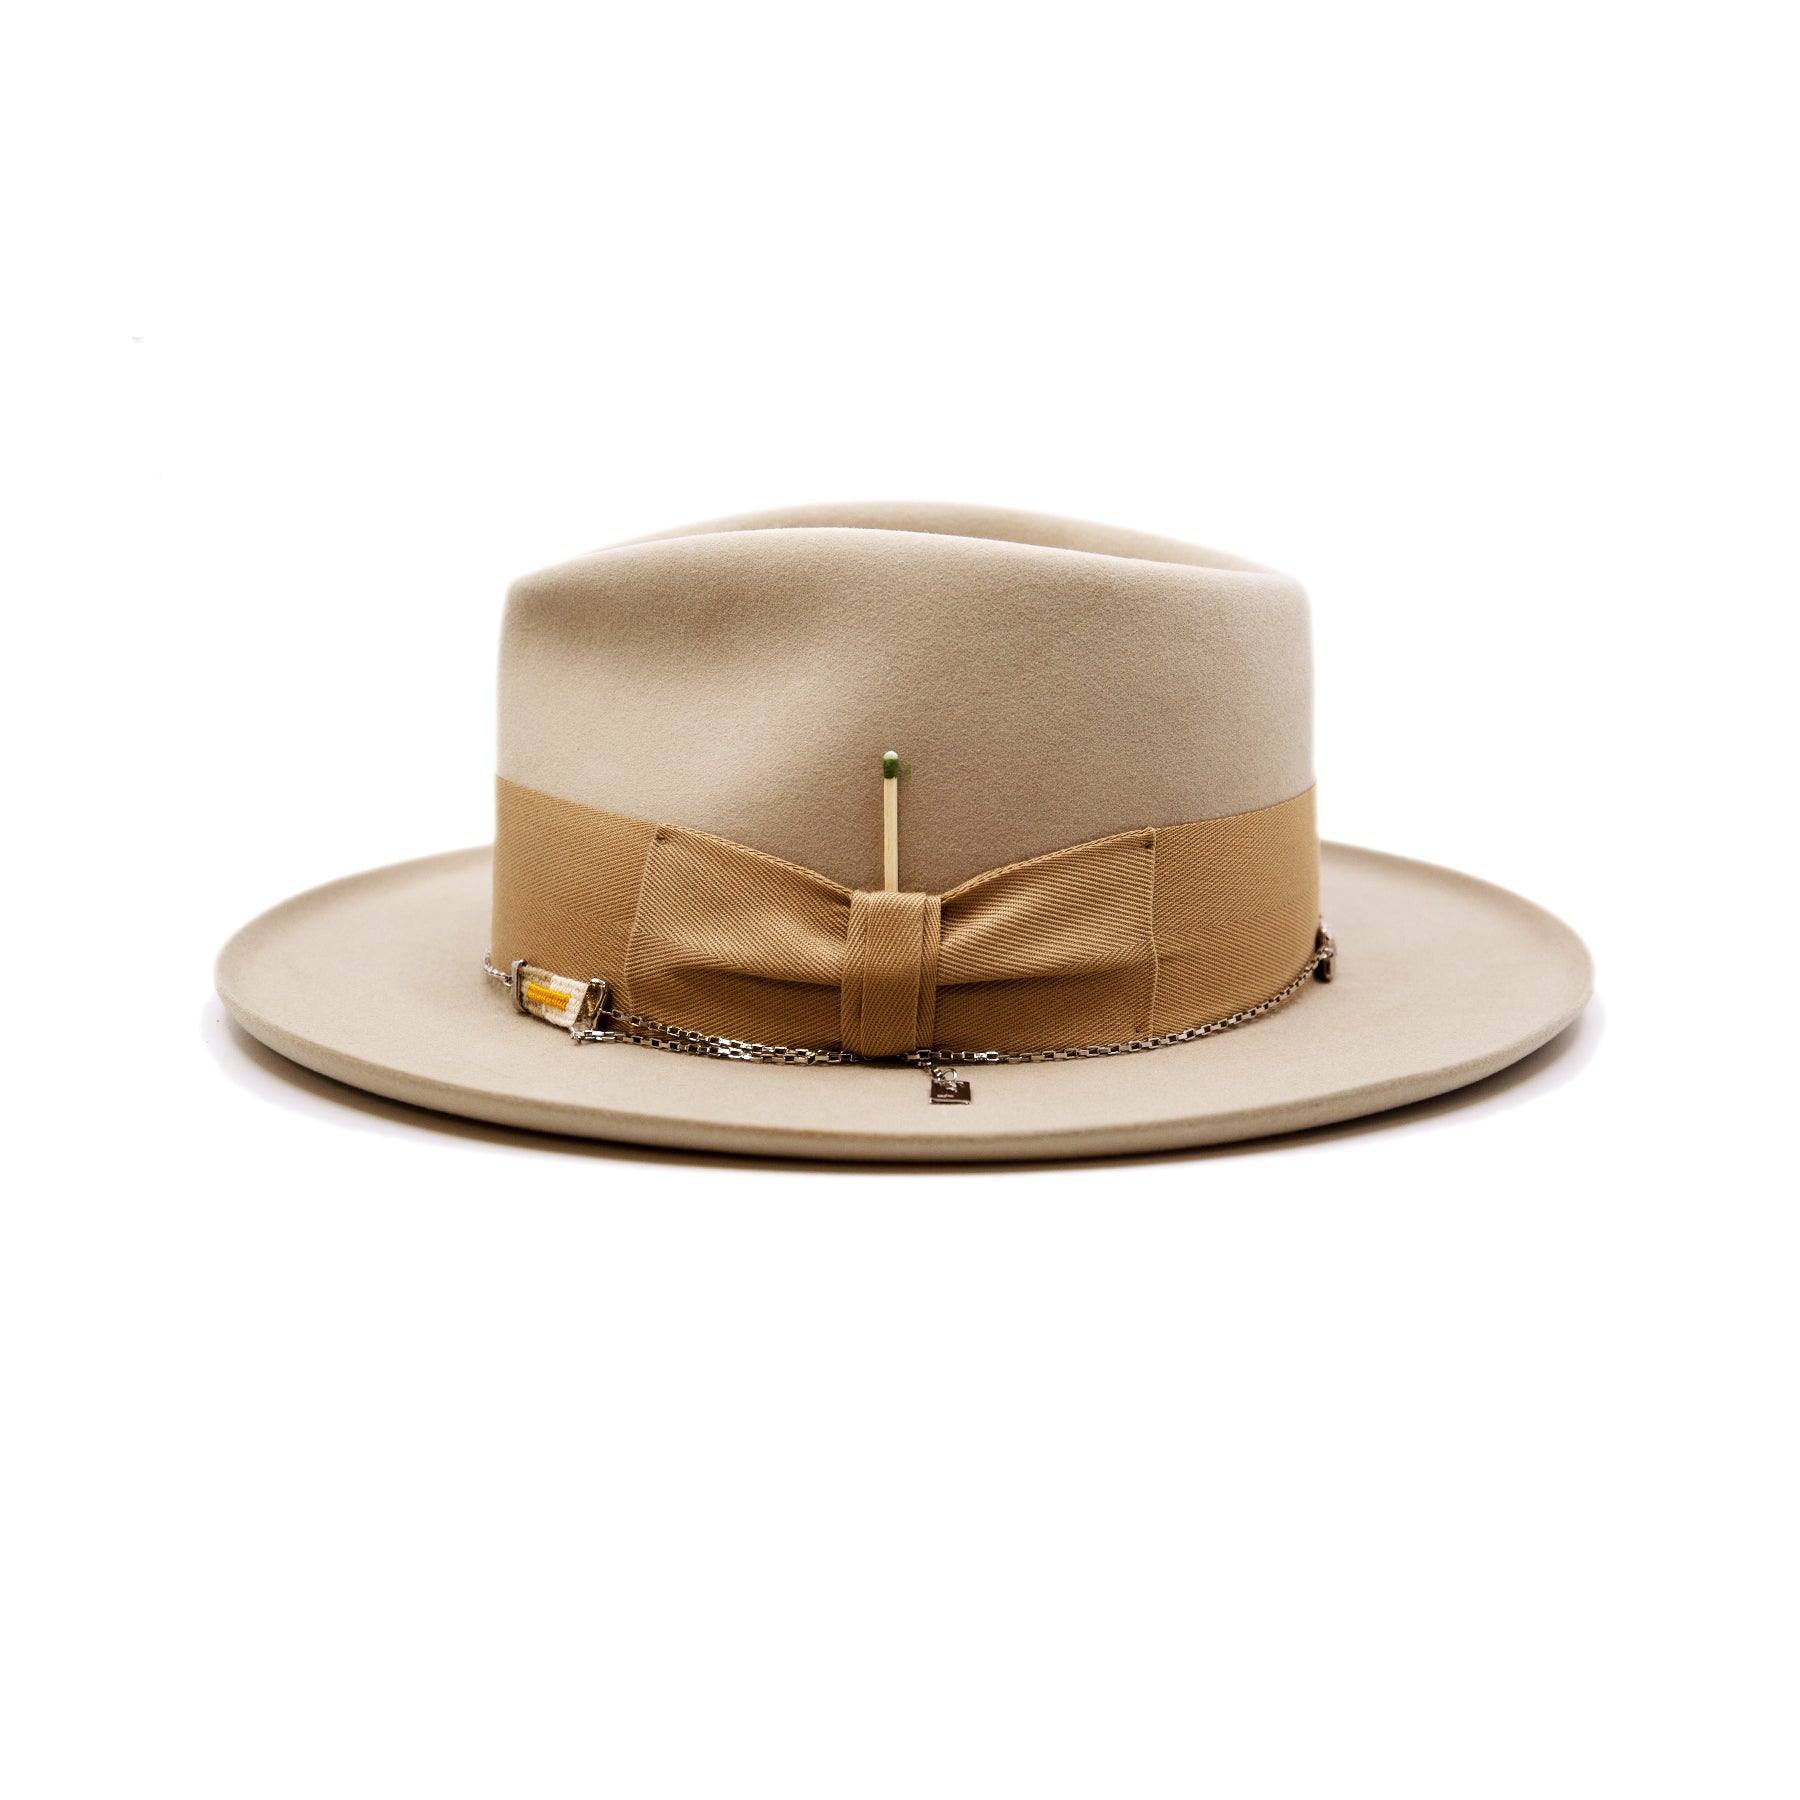 St. Palais  100% felt hat in Sand  Western Weight  2" tonal herringbone band and bow   NF Italian chain on base  Slight pencil curled brim  Made in USA